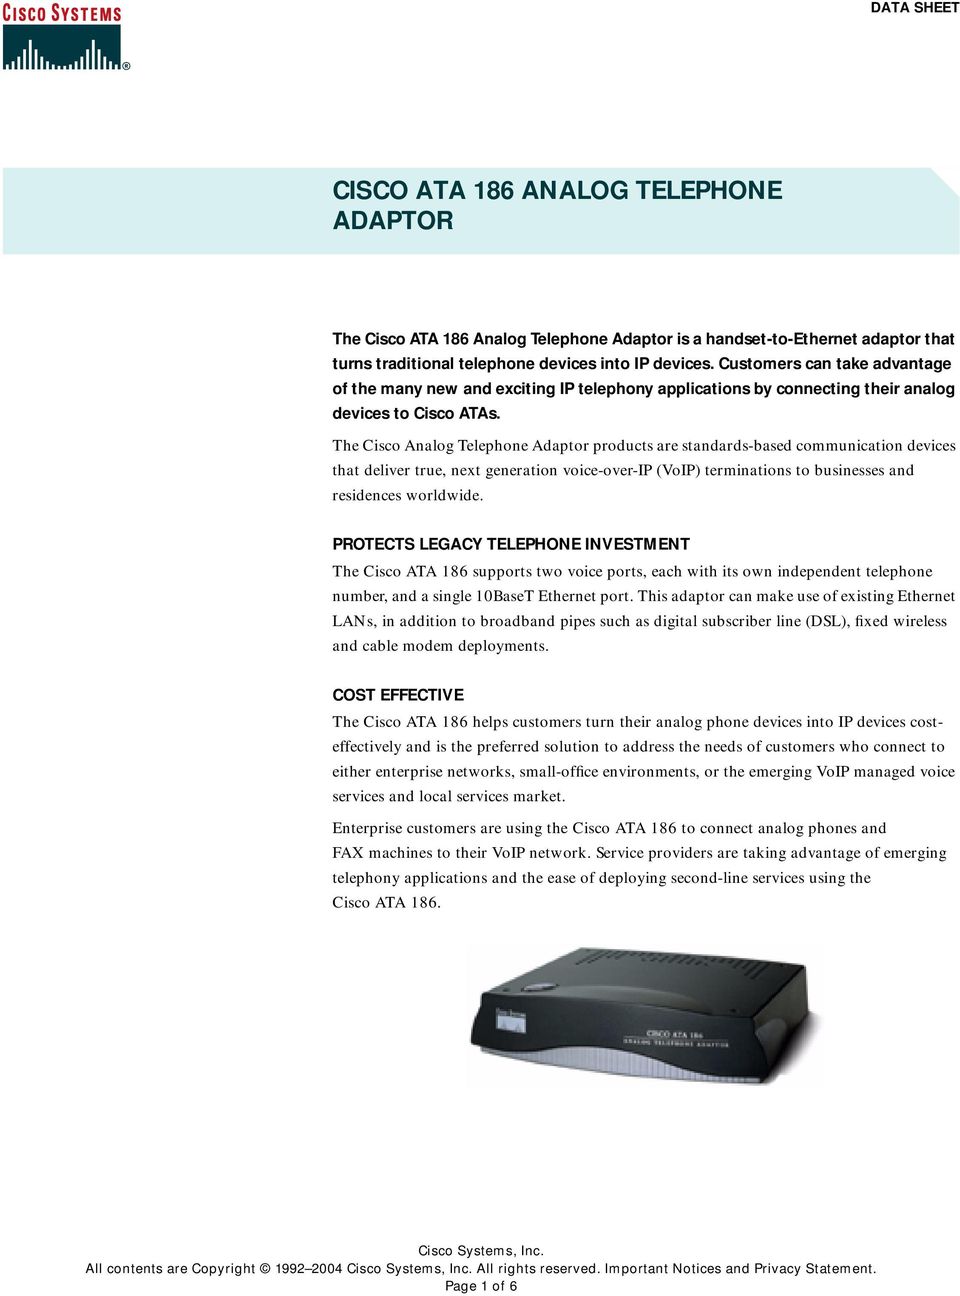 The Cisco Analog Telephone Adaptor products are standards-based communication devices that deliver true, next generation voice-over-ip (VoIP) terminations to businesses and residences worldwide.